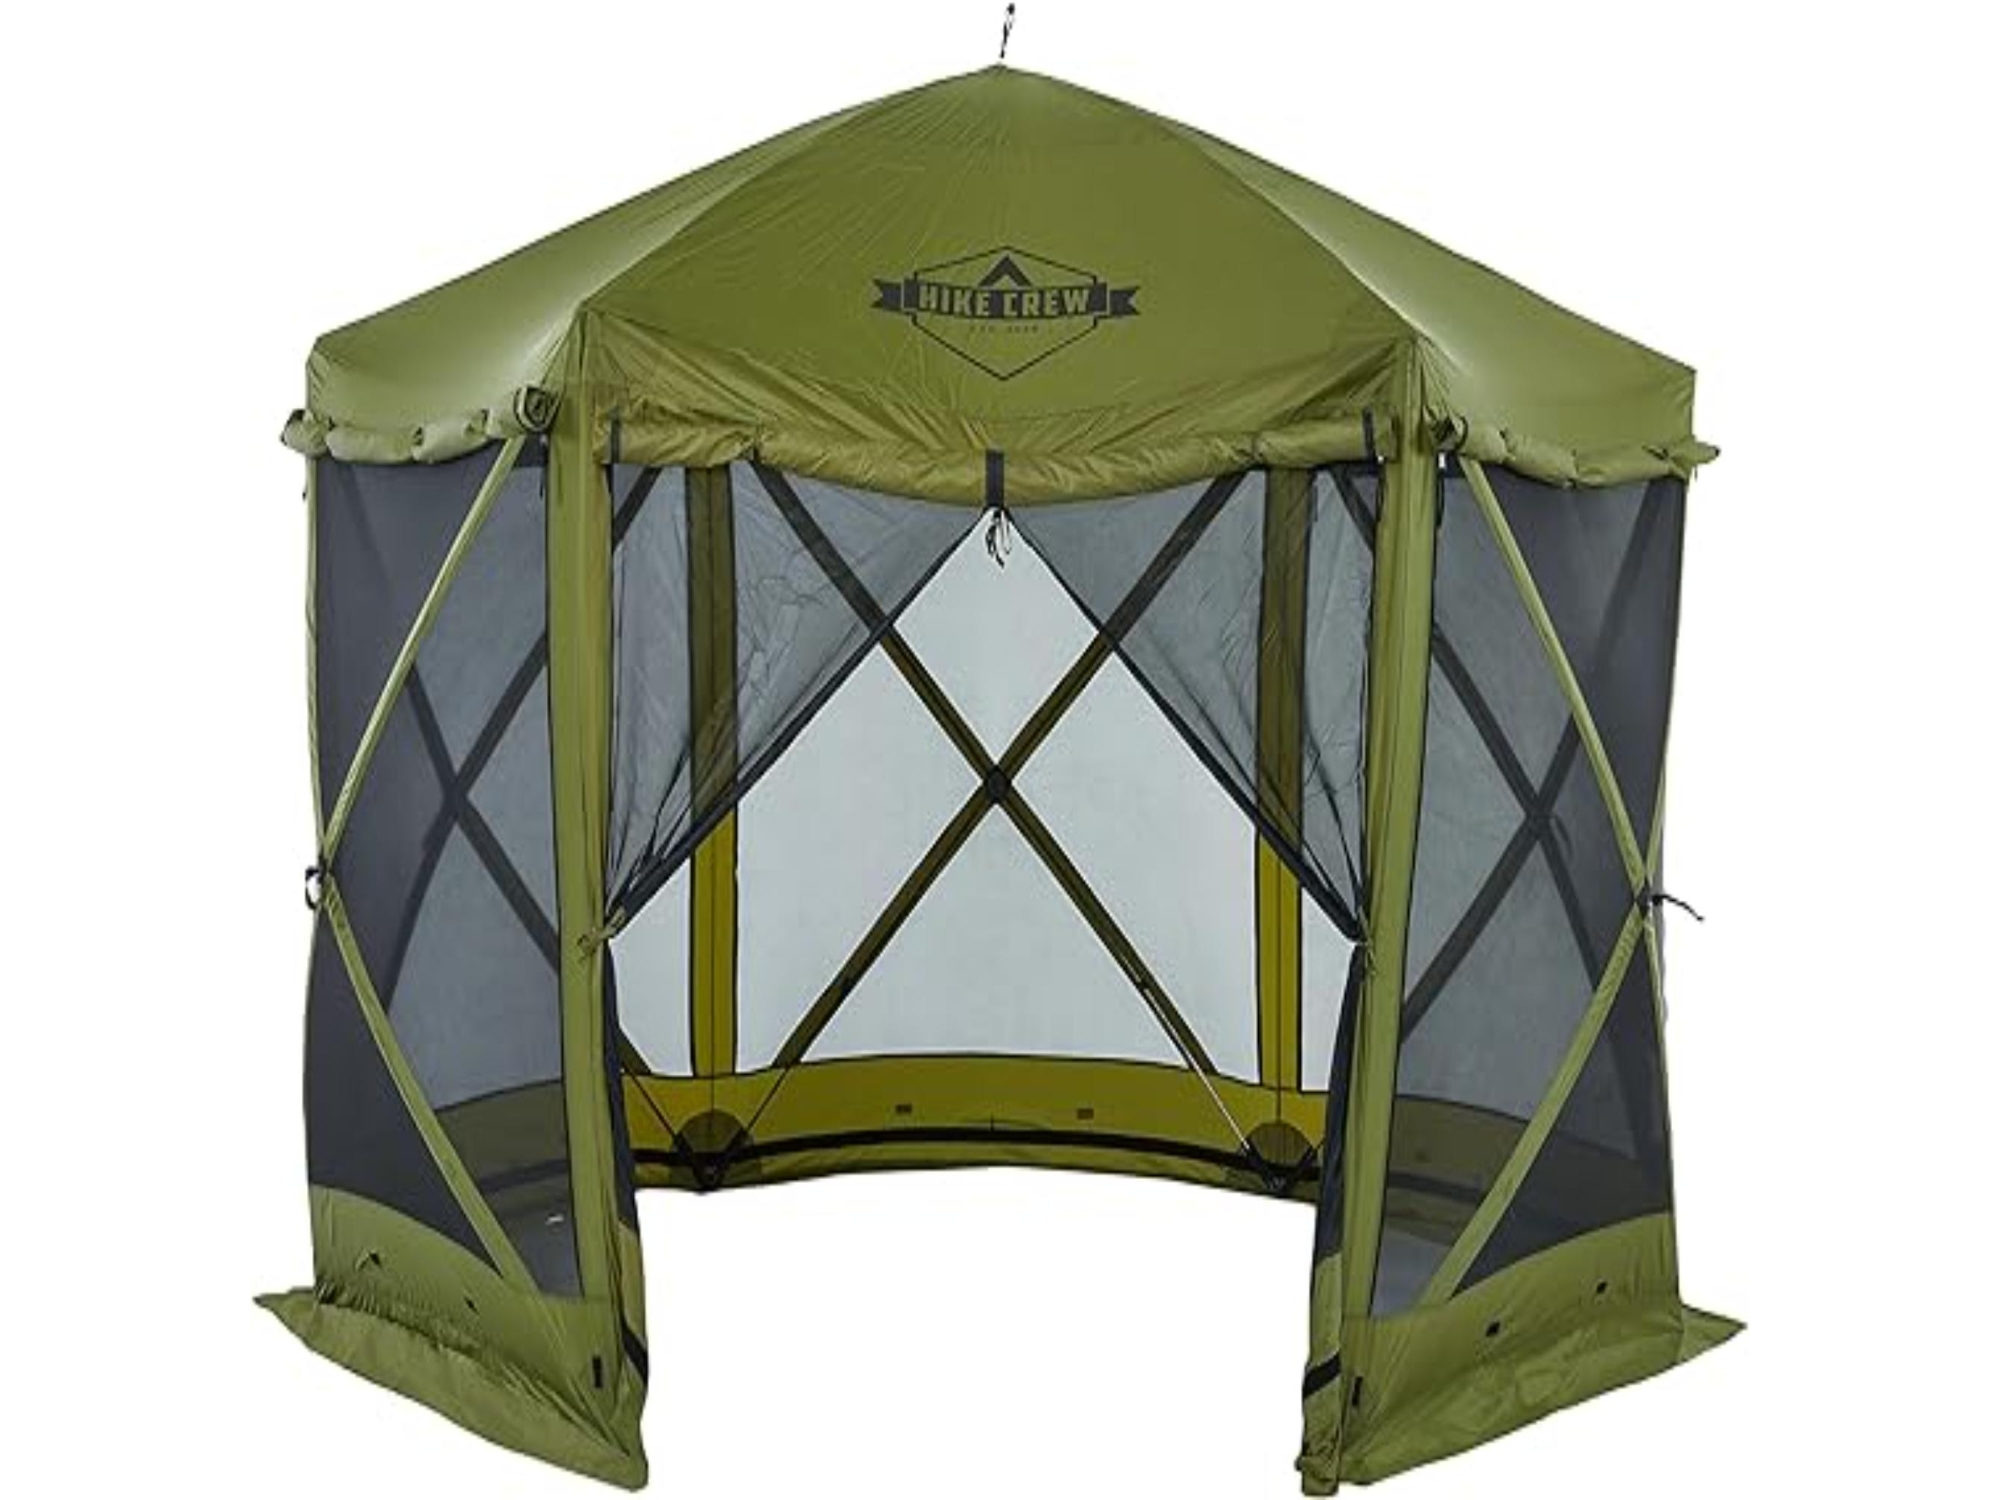 Image of Hike Crew 12x12 Pop Up Gazebo Outdoor Tent Canopy w/Wind Panels Green ID 843812179683